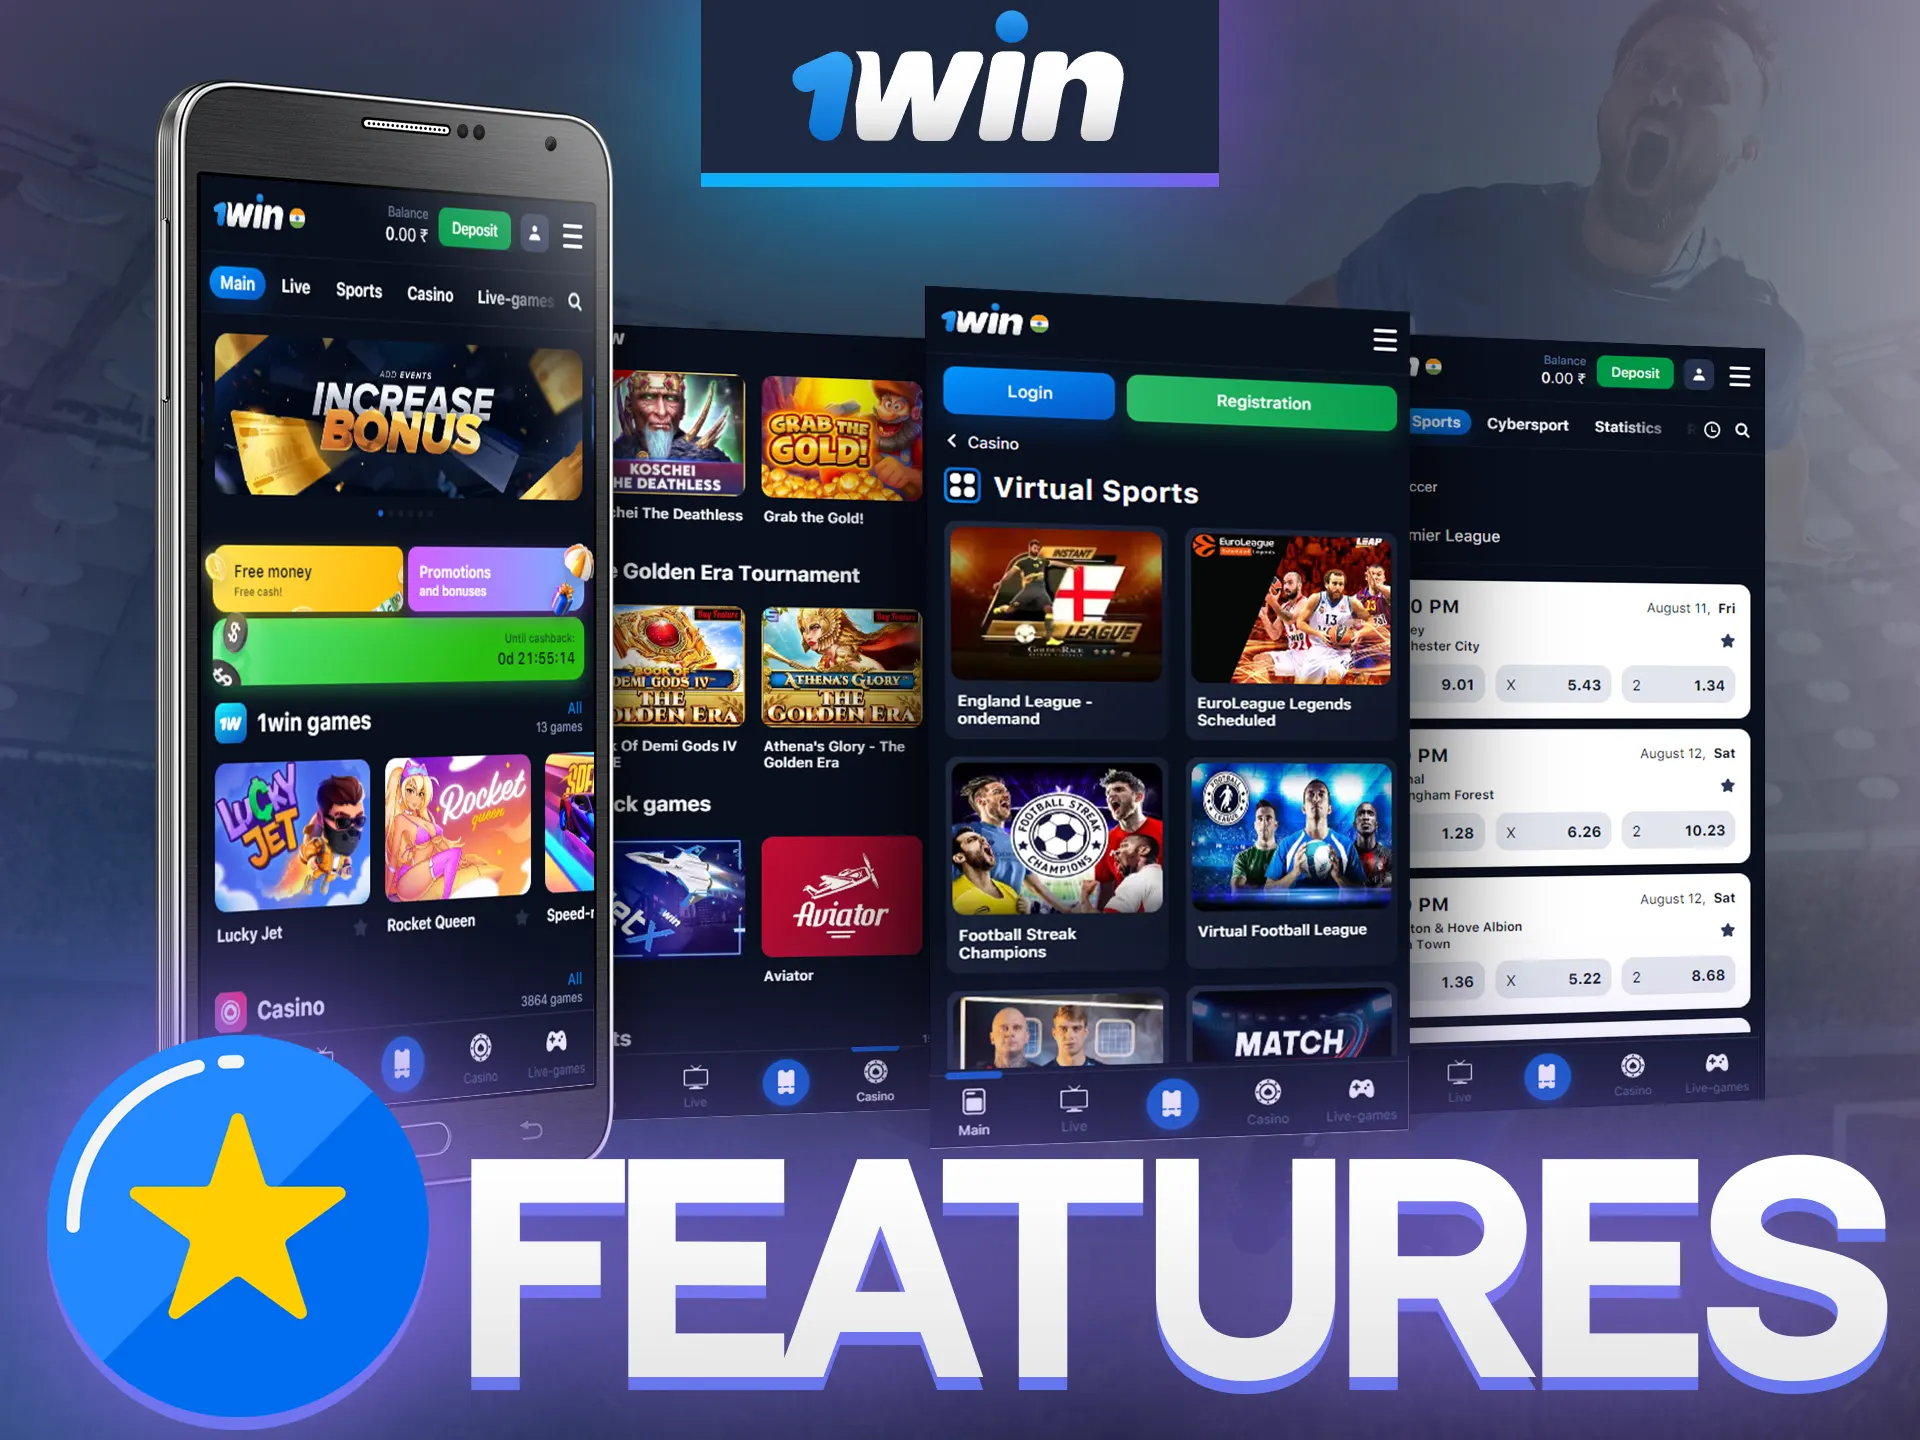 The 1Win app has convenient features.